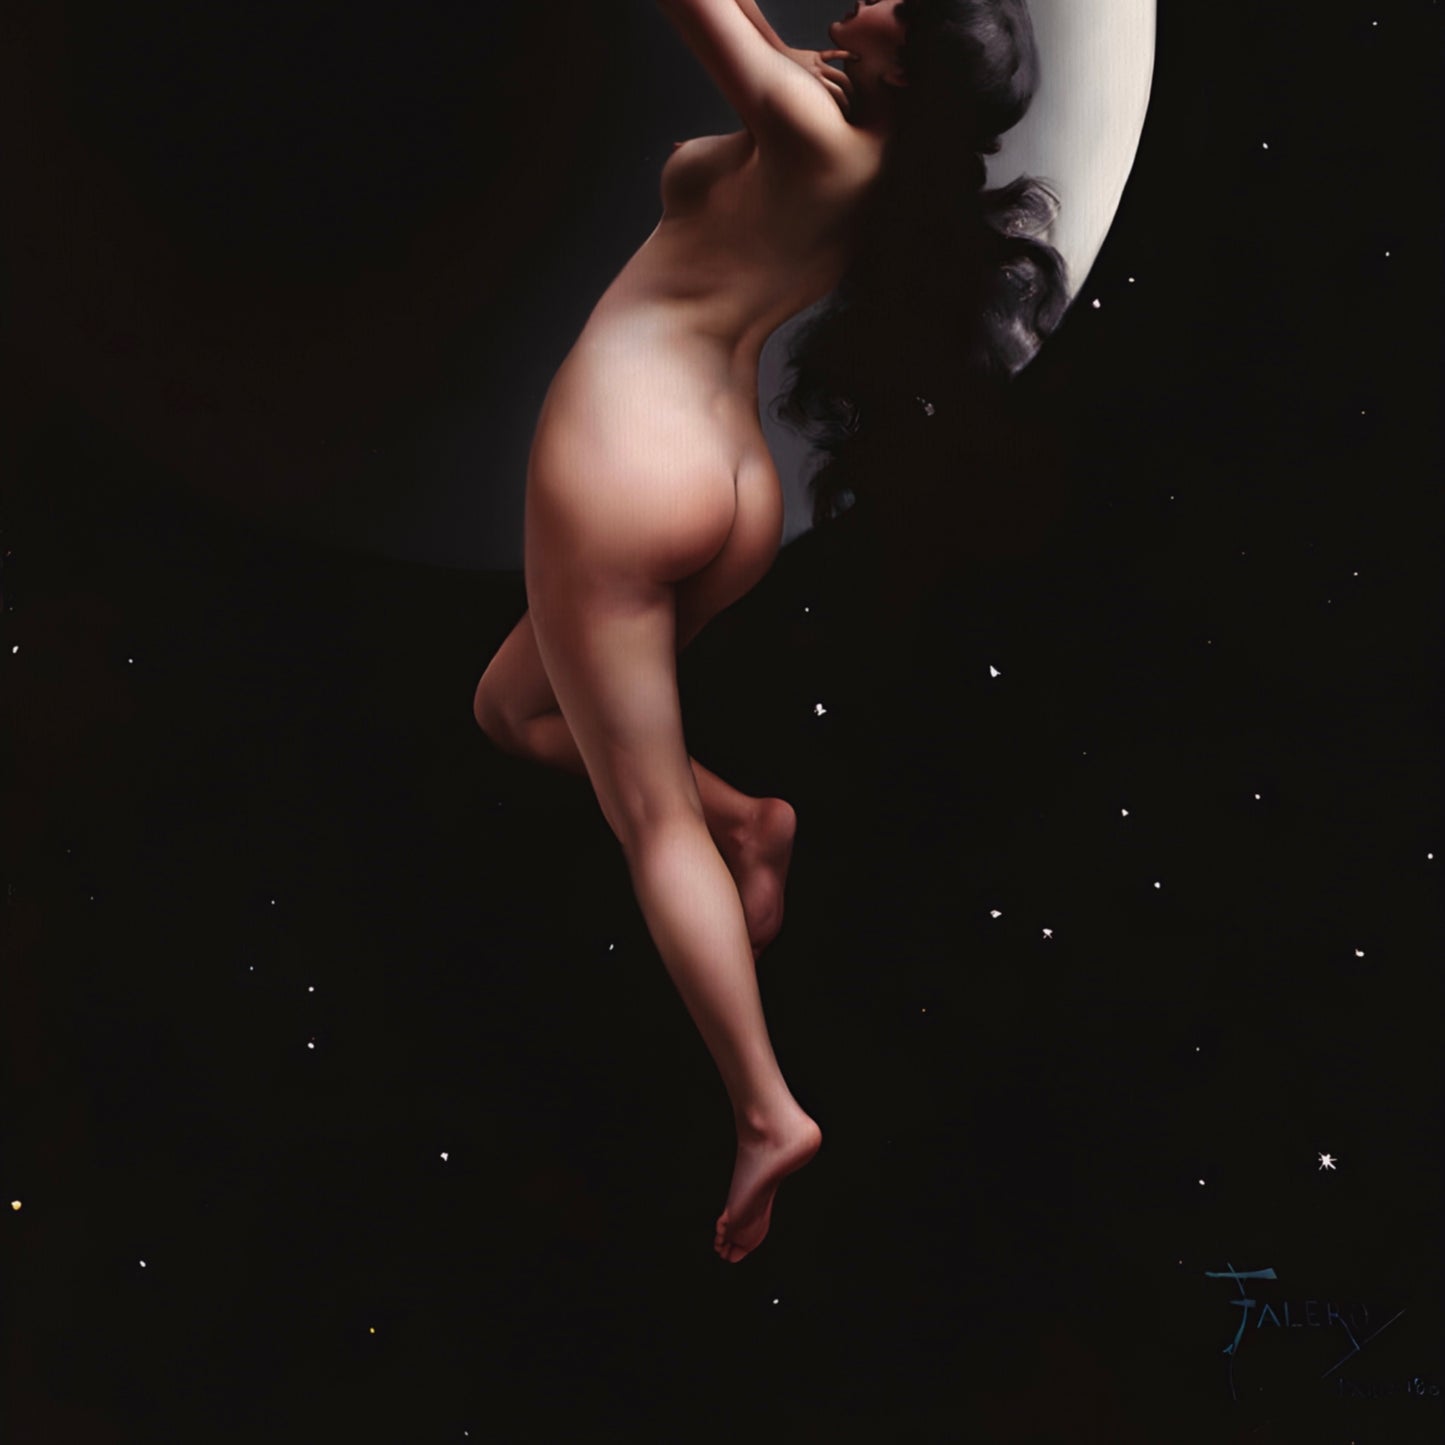 The Moon Nymph